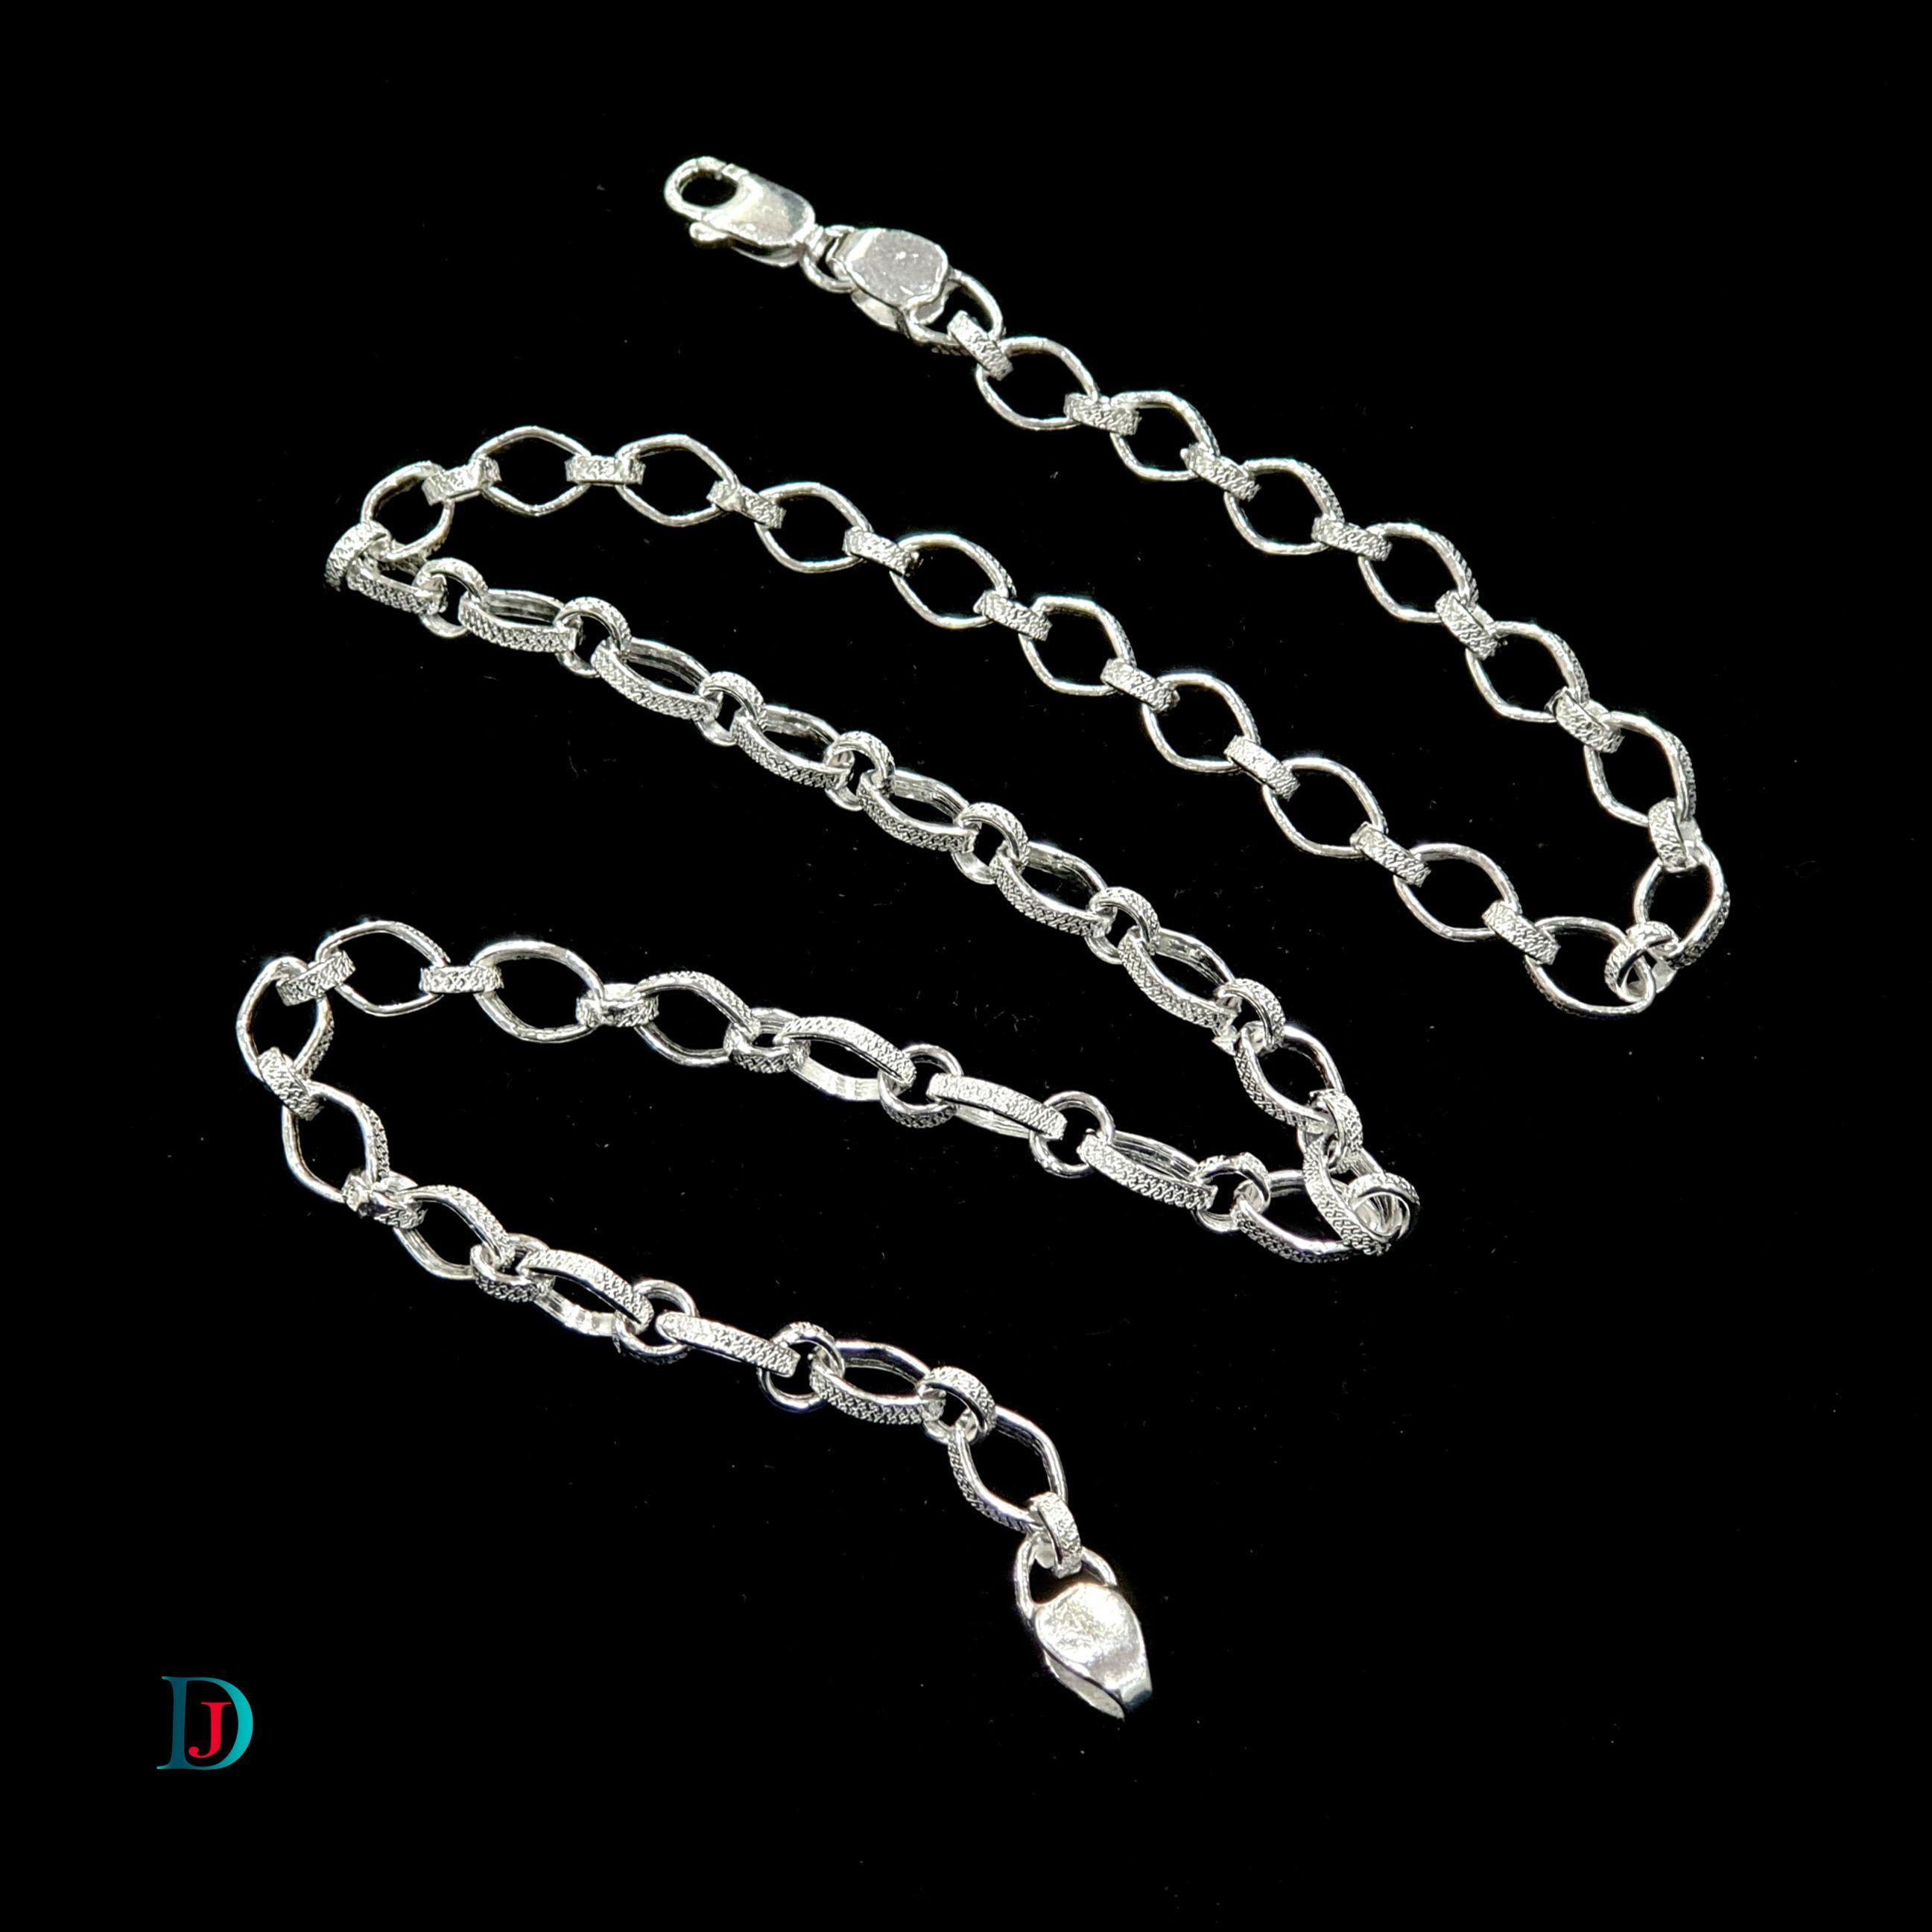 New and Latest Design of Desi Rajasthani Silver Chain Jewellery 